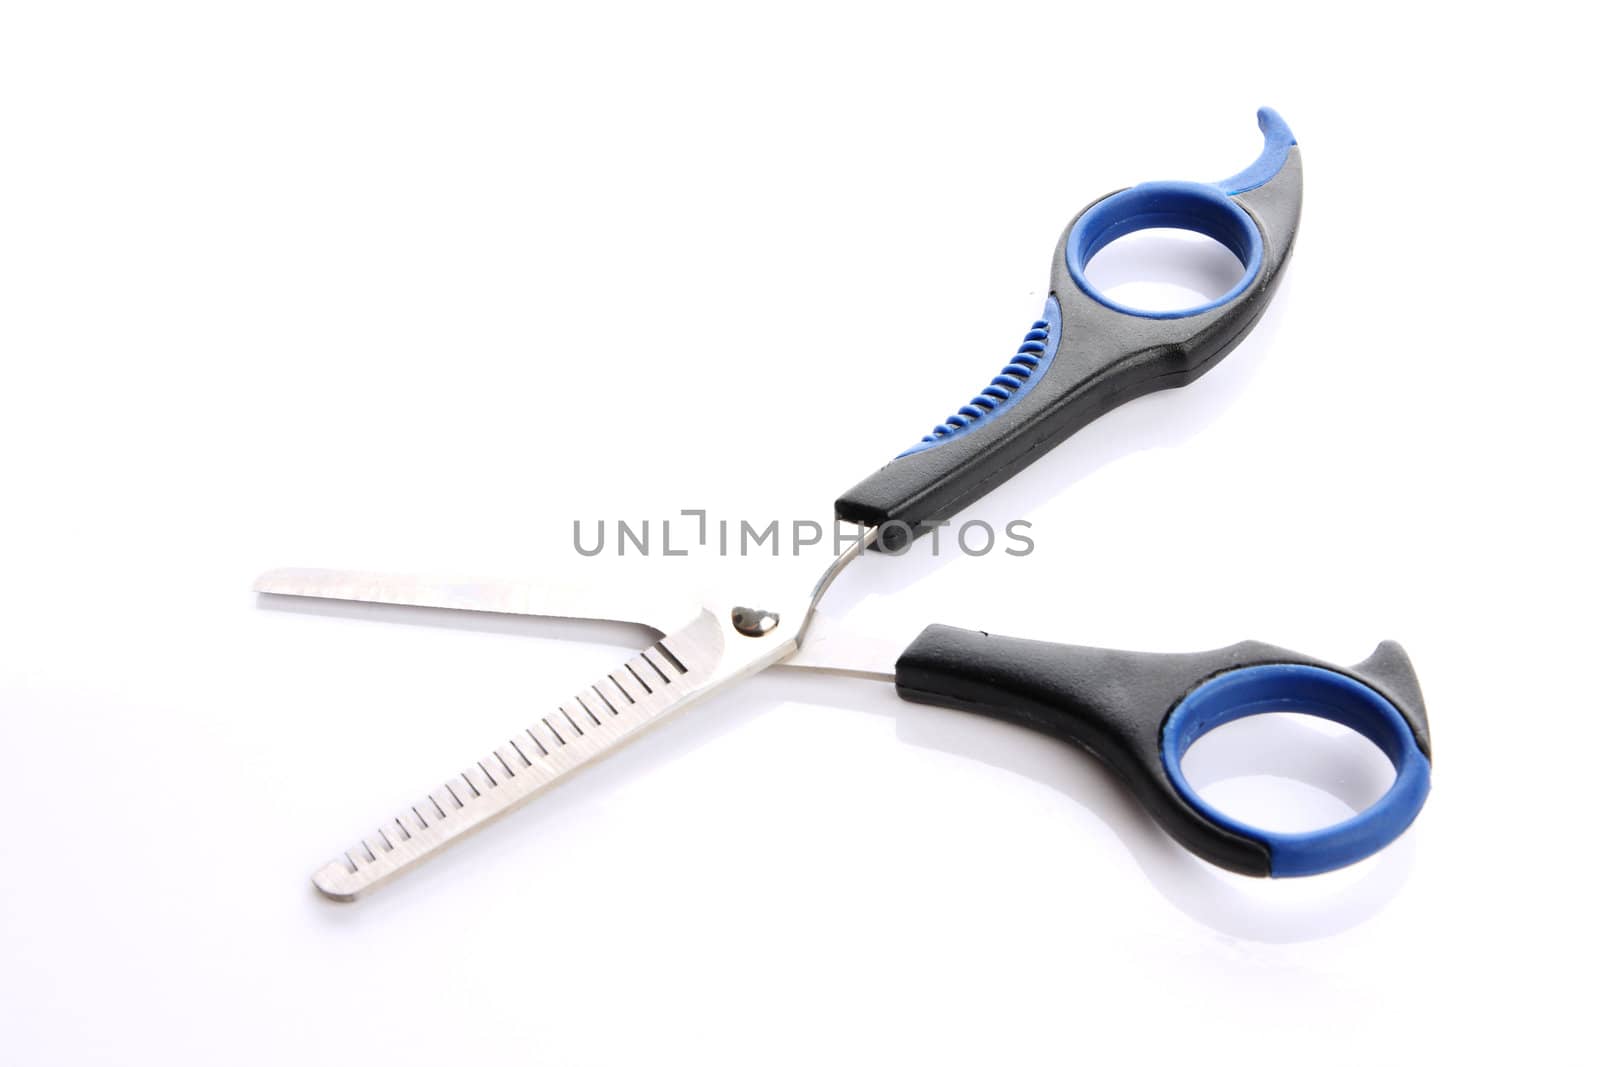 Hair scissors by posterize